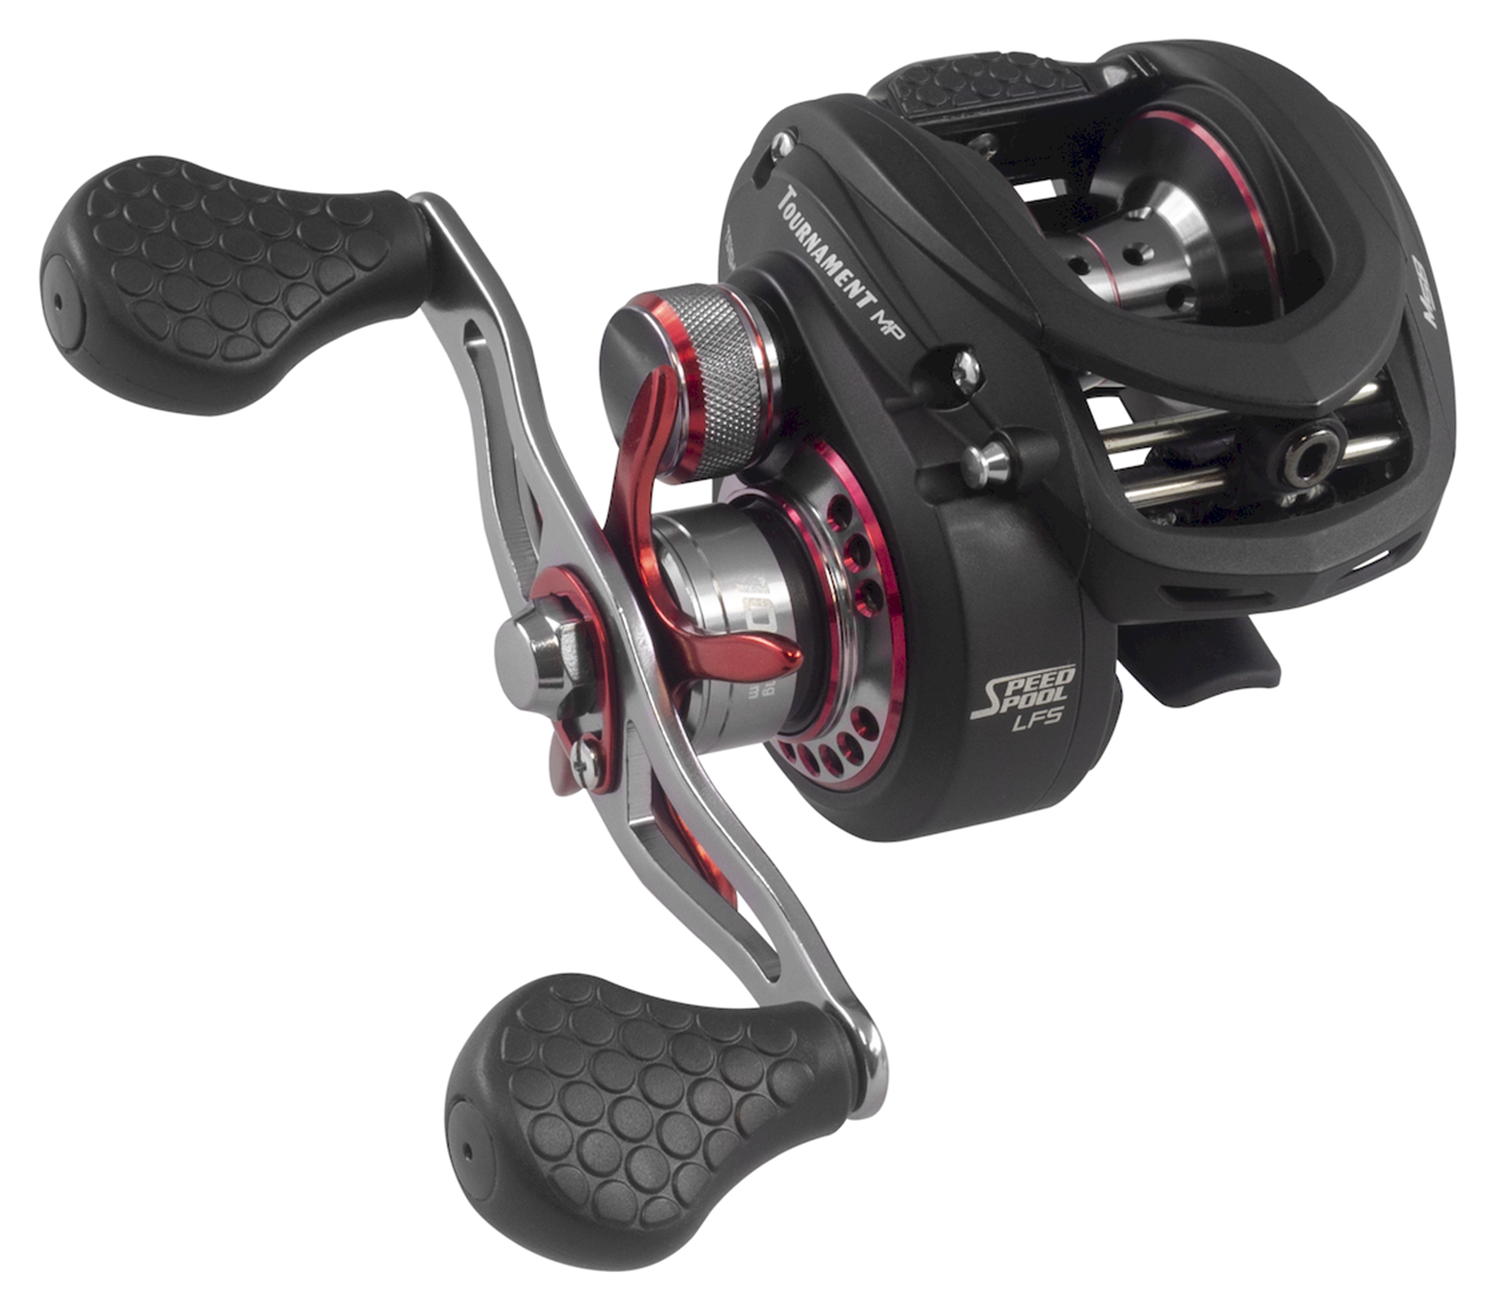 Lew's LWTS1SHMP Tournament MP Baitcast Reel with Free S&H — CampSaver